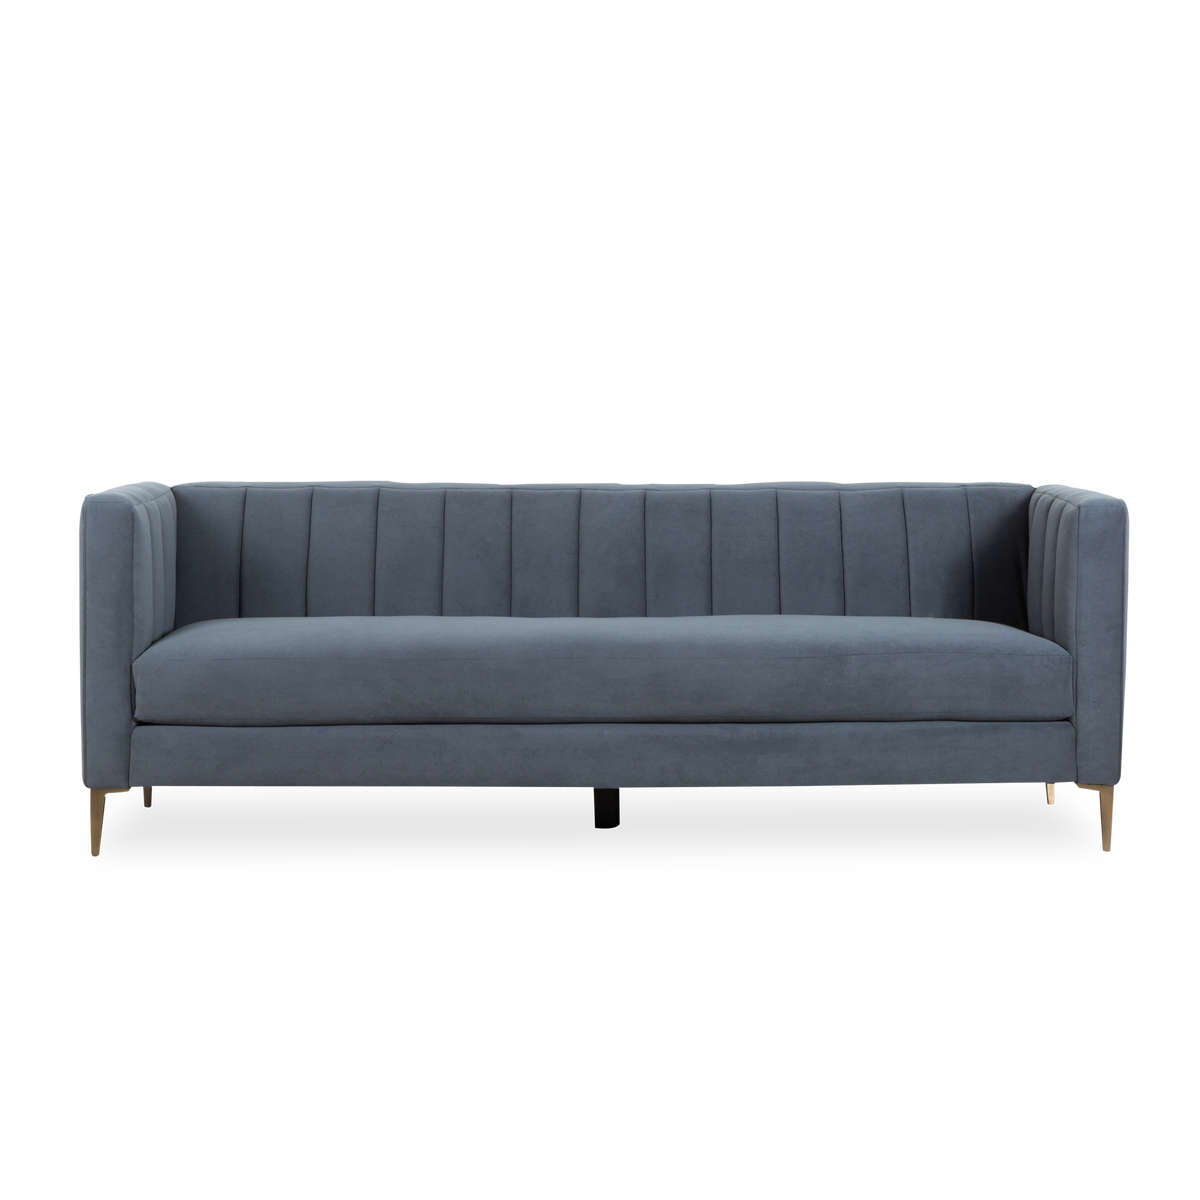 A fresh take on a classic, the Coco Sofa offers an update of the traditional tuxedo sofa.